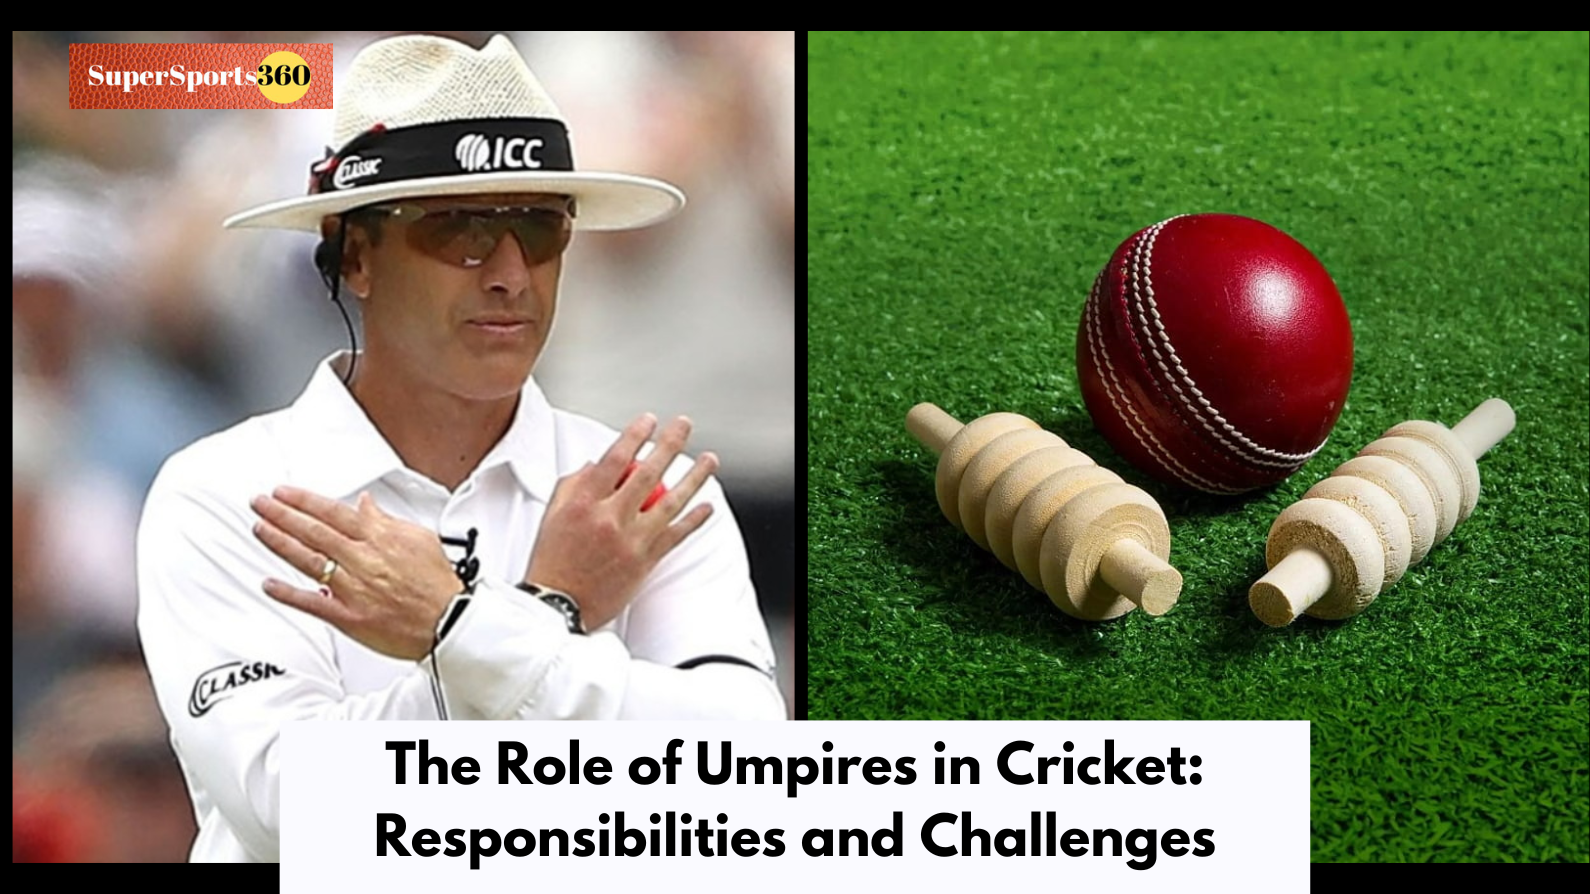 The Role of Umpires in Cricket: Responsibilities and Challenges